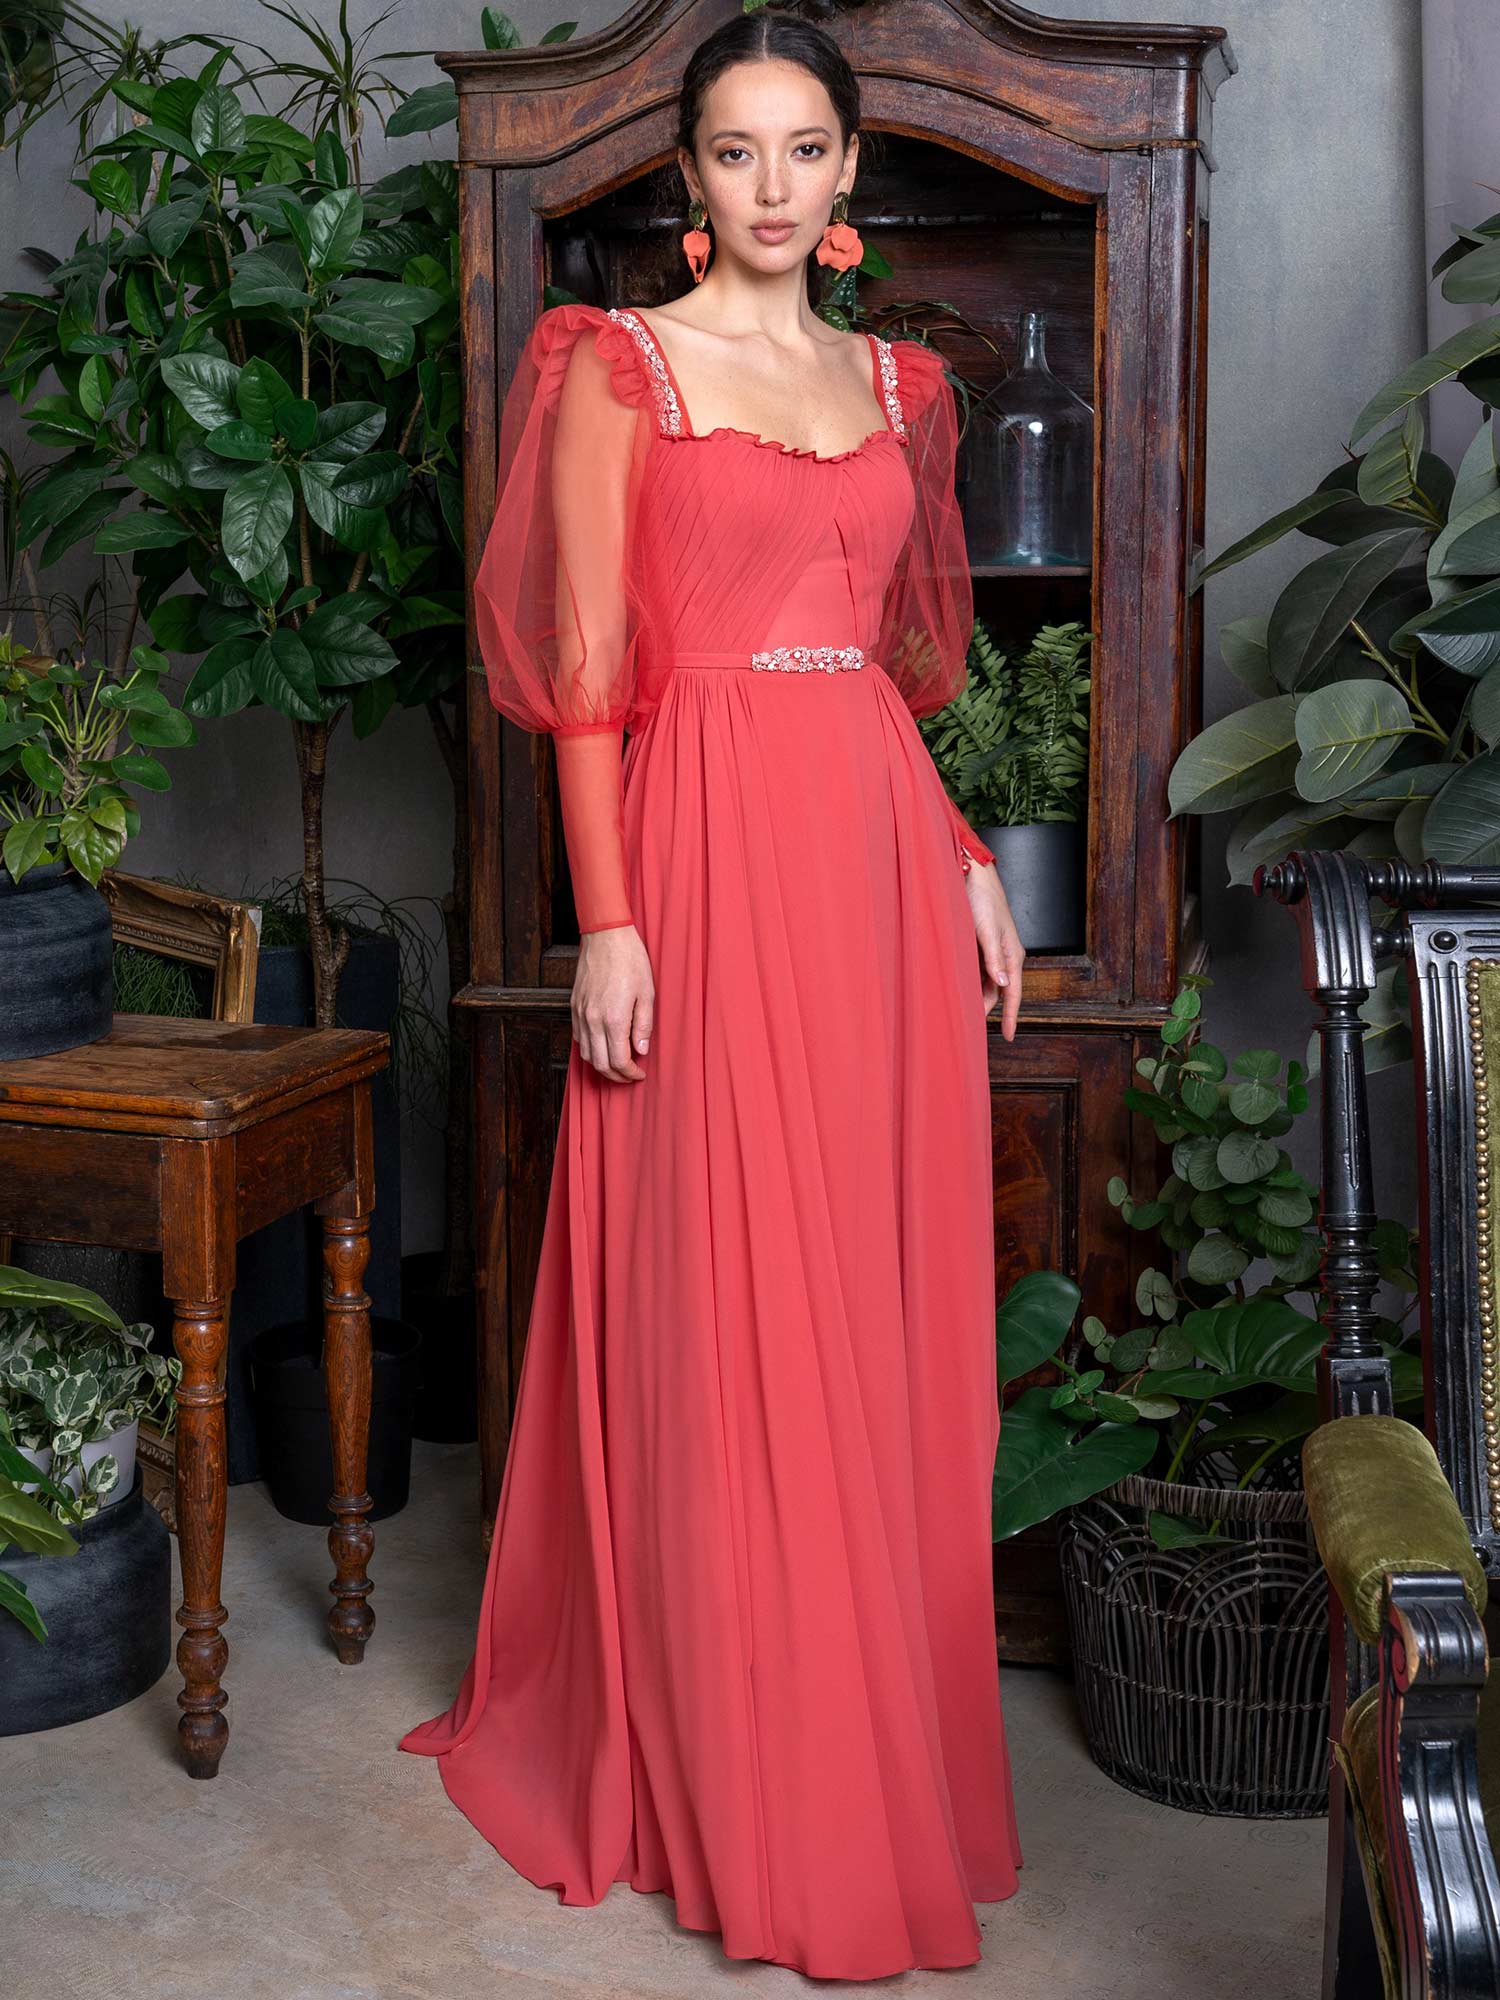 Puff sleeve evening dress with draped bodice and embellishments